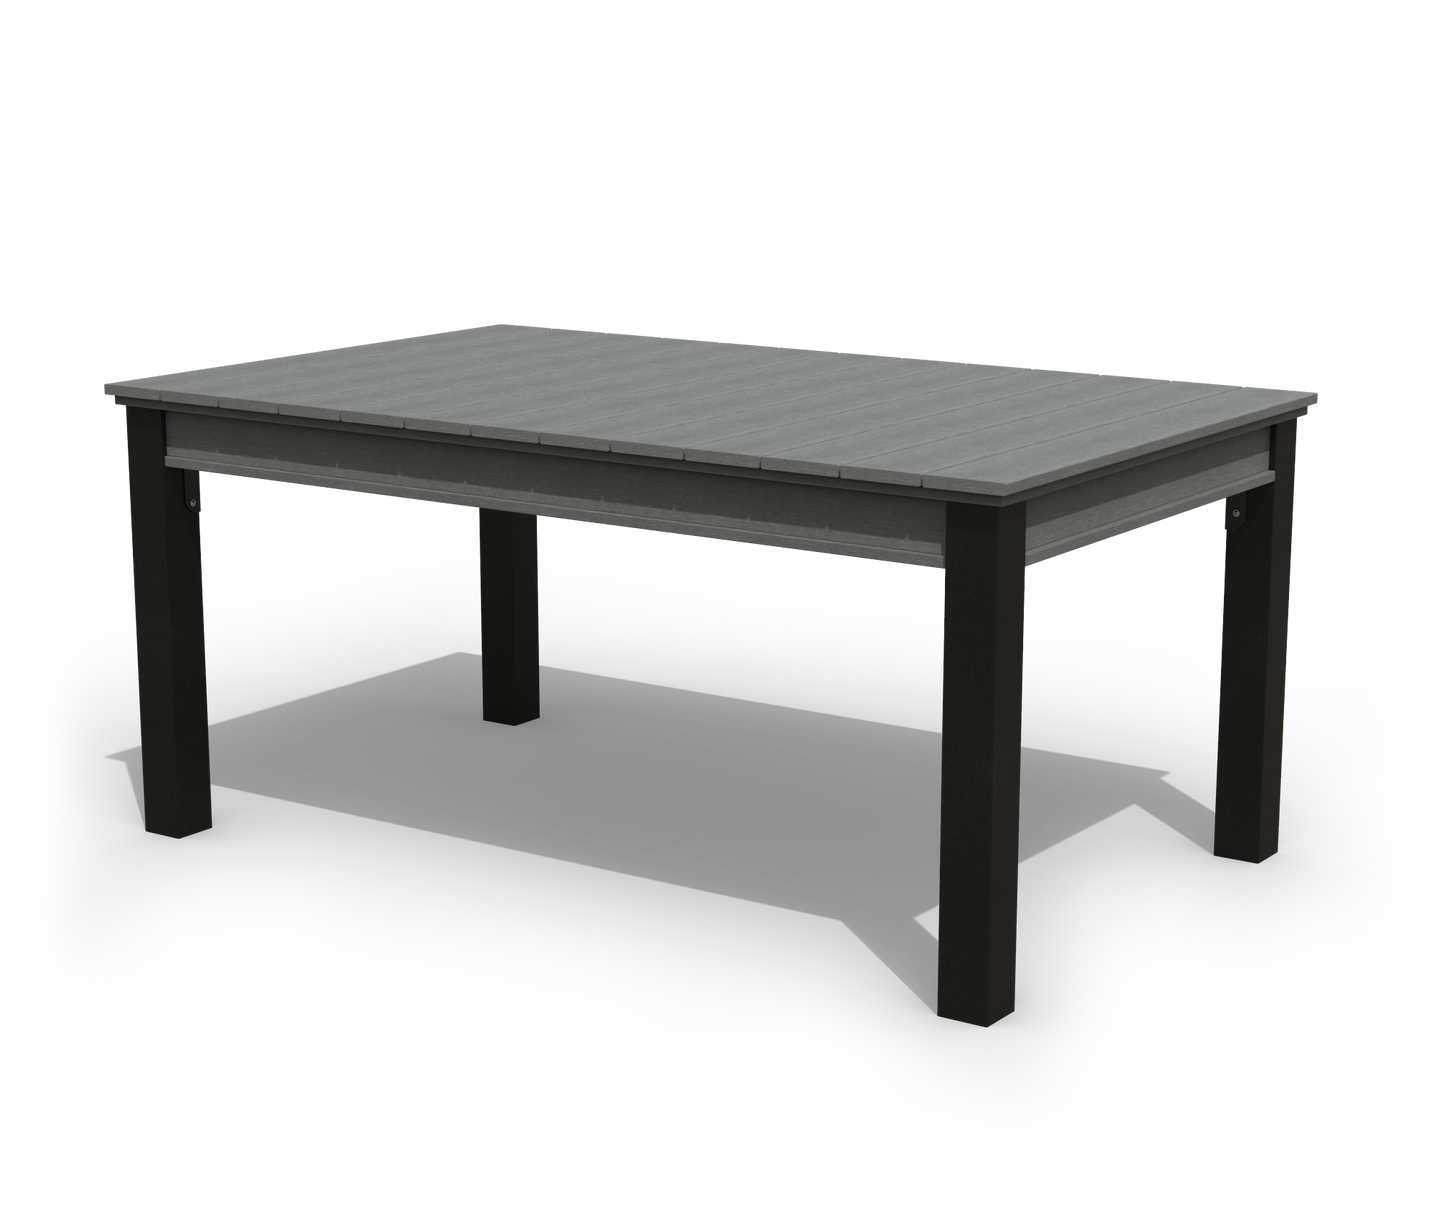 Patiova Recycled Plastic 4'x6' Coastal Dining Table - LEAD TIME TO SHIP 3 WEEKS